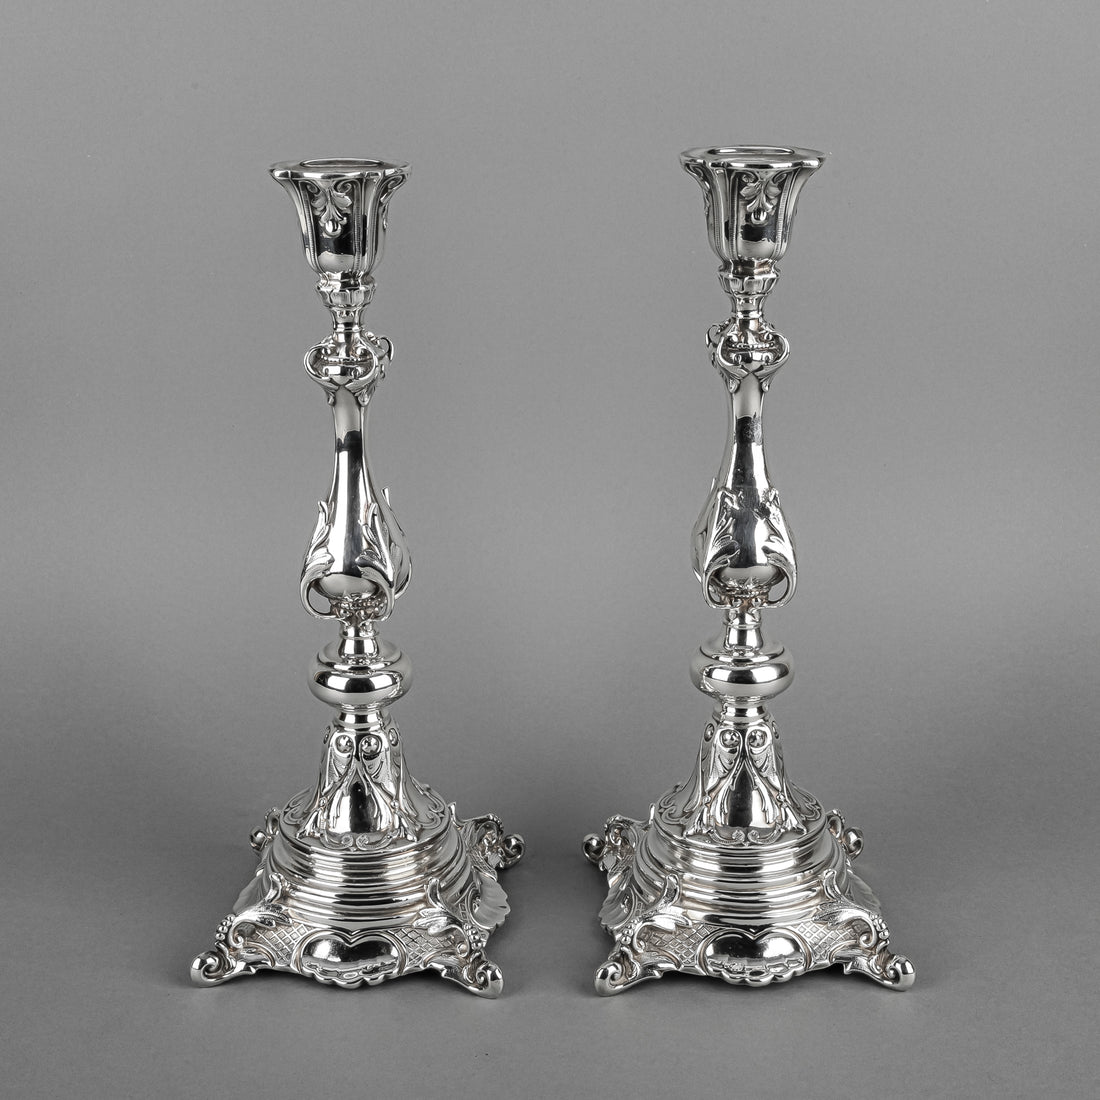 NORBLIN & CO. Silverplate Candlesticks - Set of 2